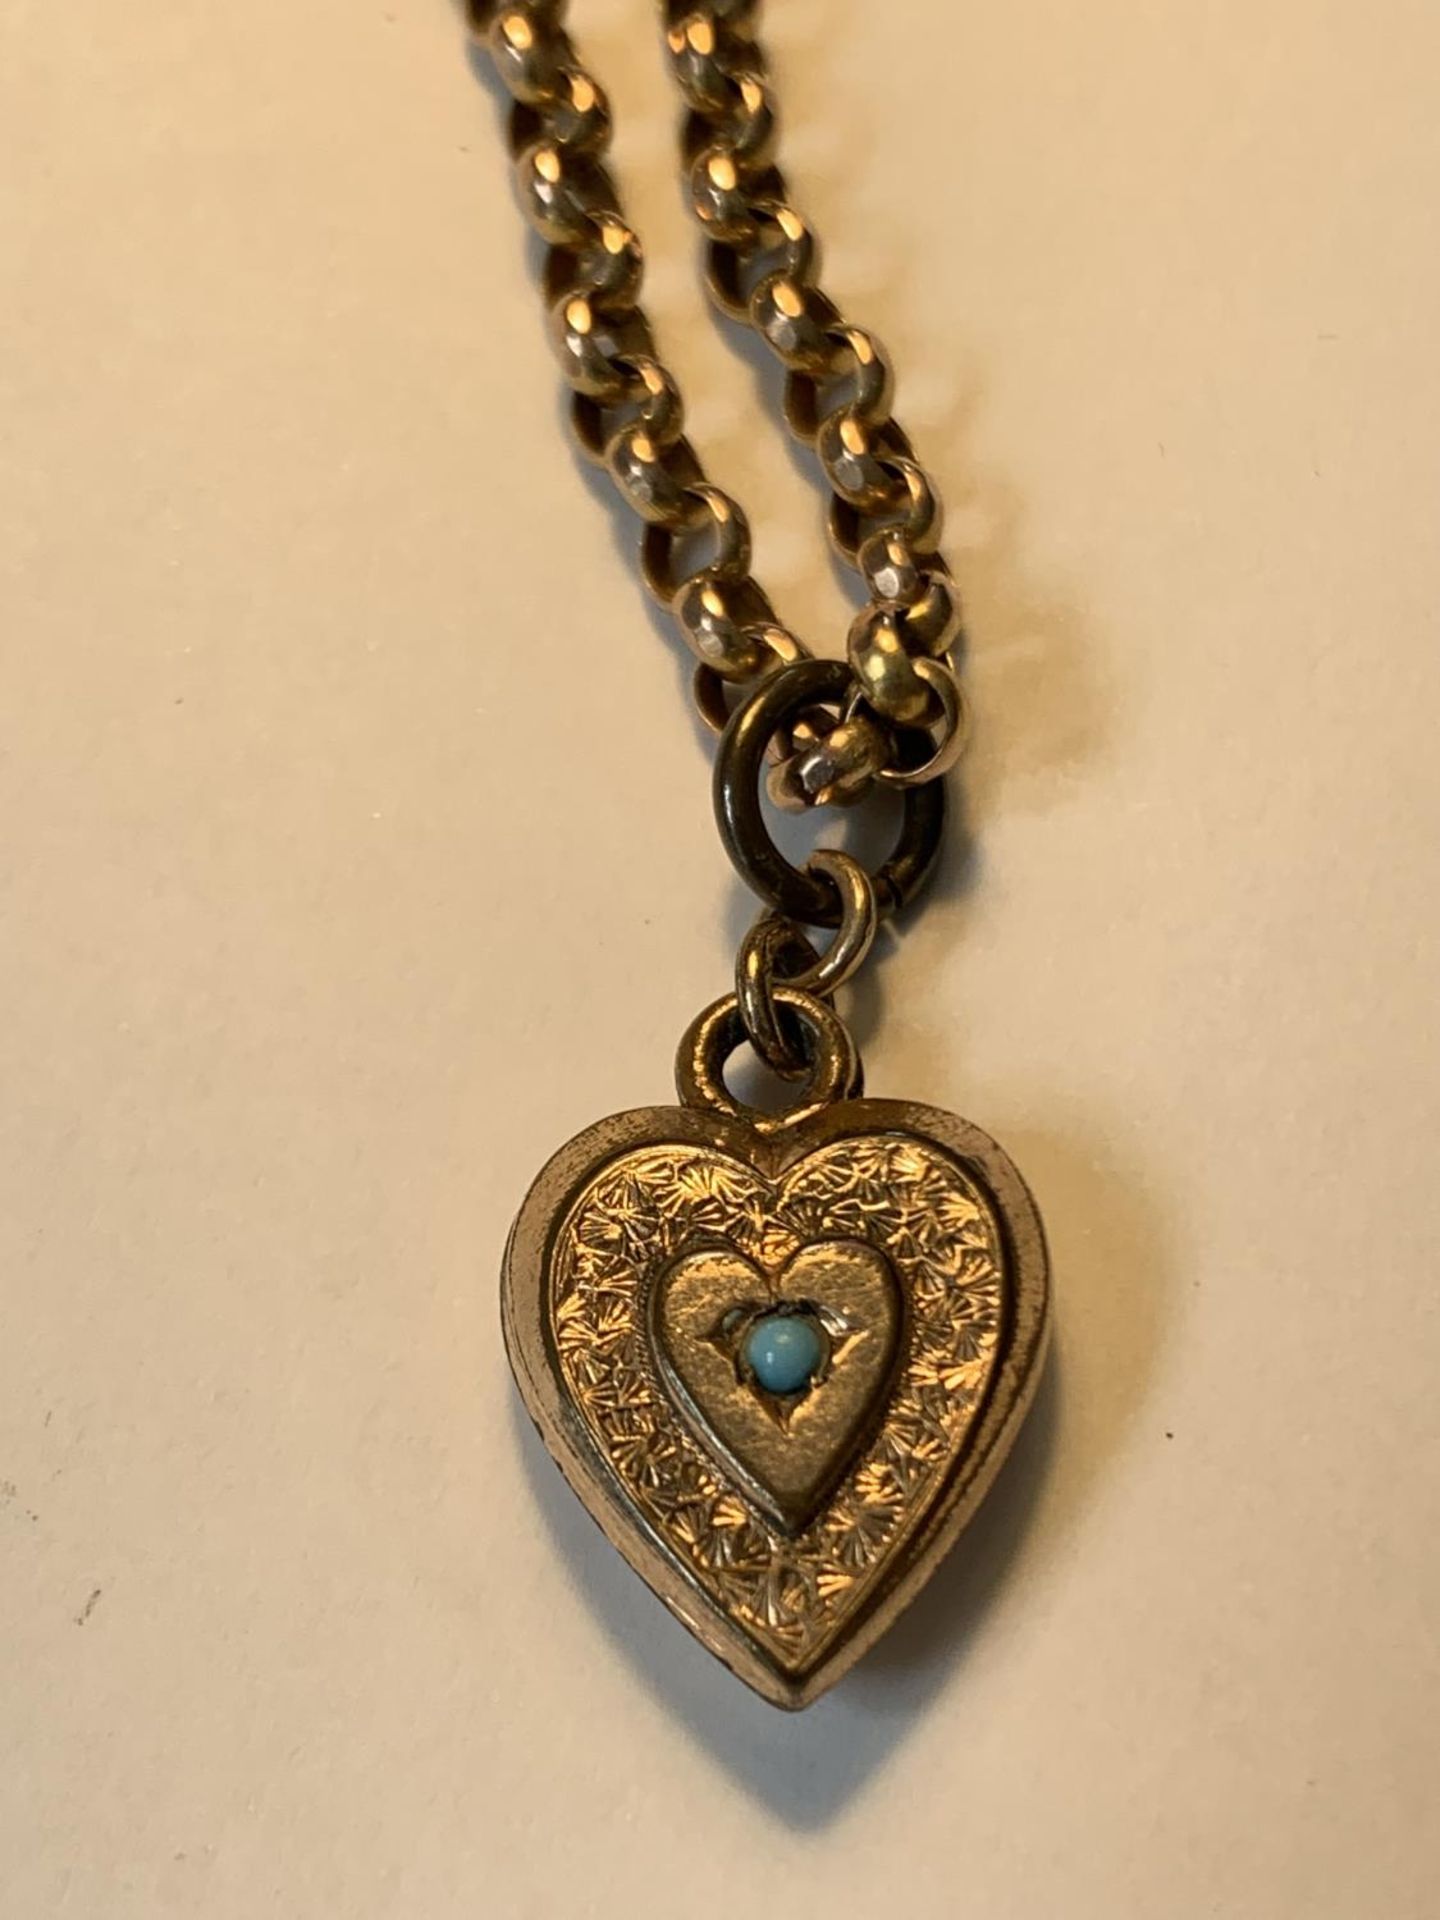 A 9 CARAT GOLD NECKLACE WITH A HEART PENDANT WITH TURQUOISE STONE GROSS WEIGHT 7.54 GRAMS WITH - Image 2 of 3